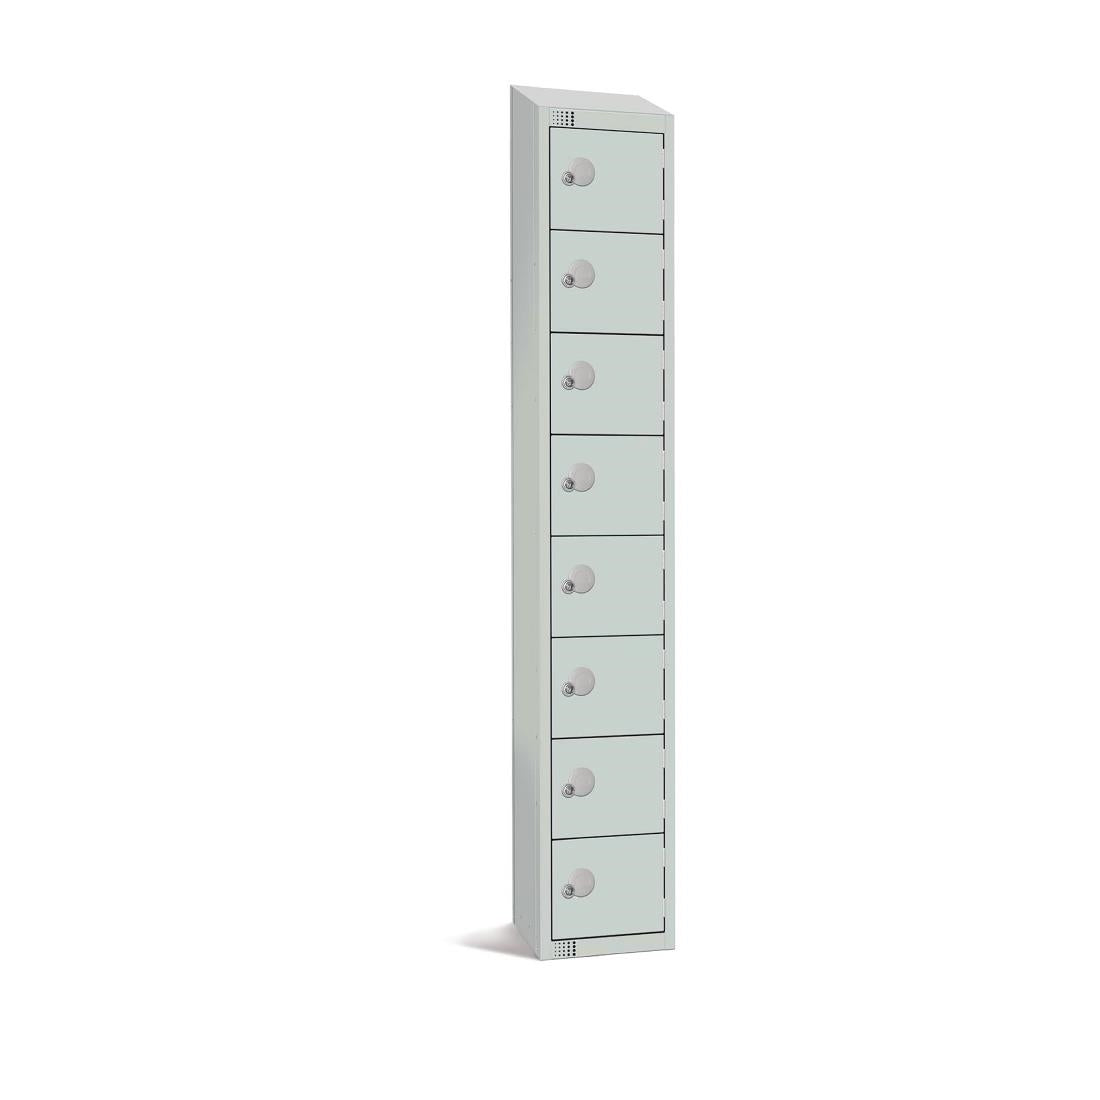 CE105-CNS Elite Eight Door Coin Return Locker with Sloping Top Grey JD Catering Equipment Solutions Ltd